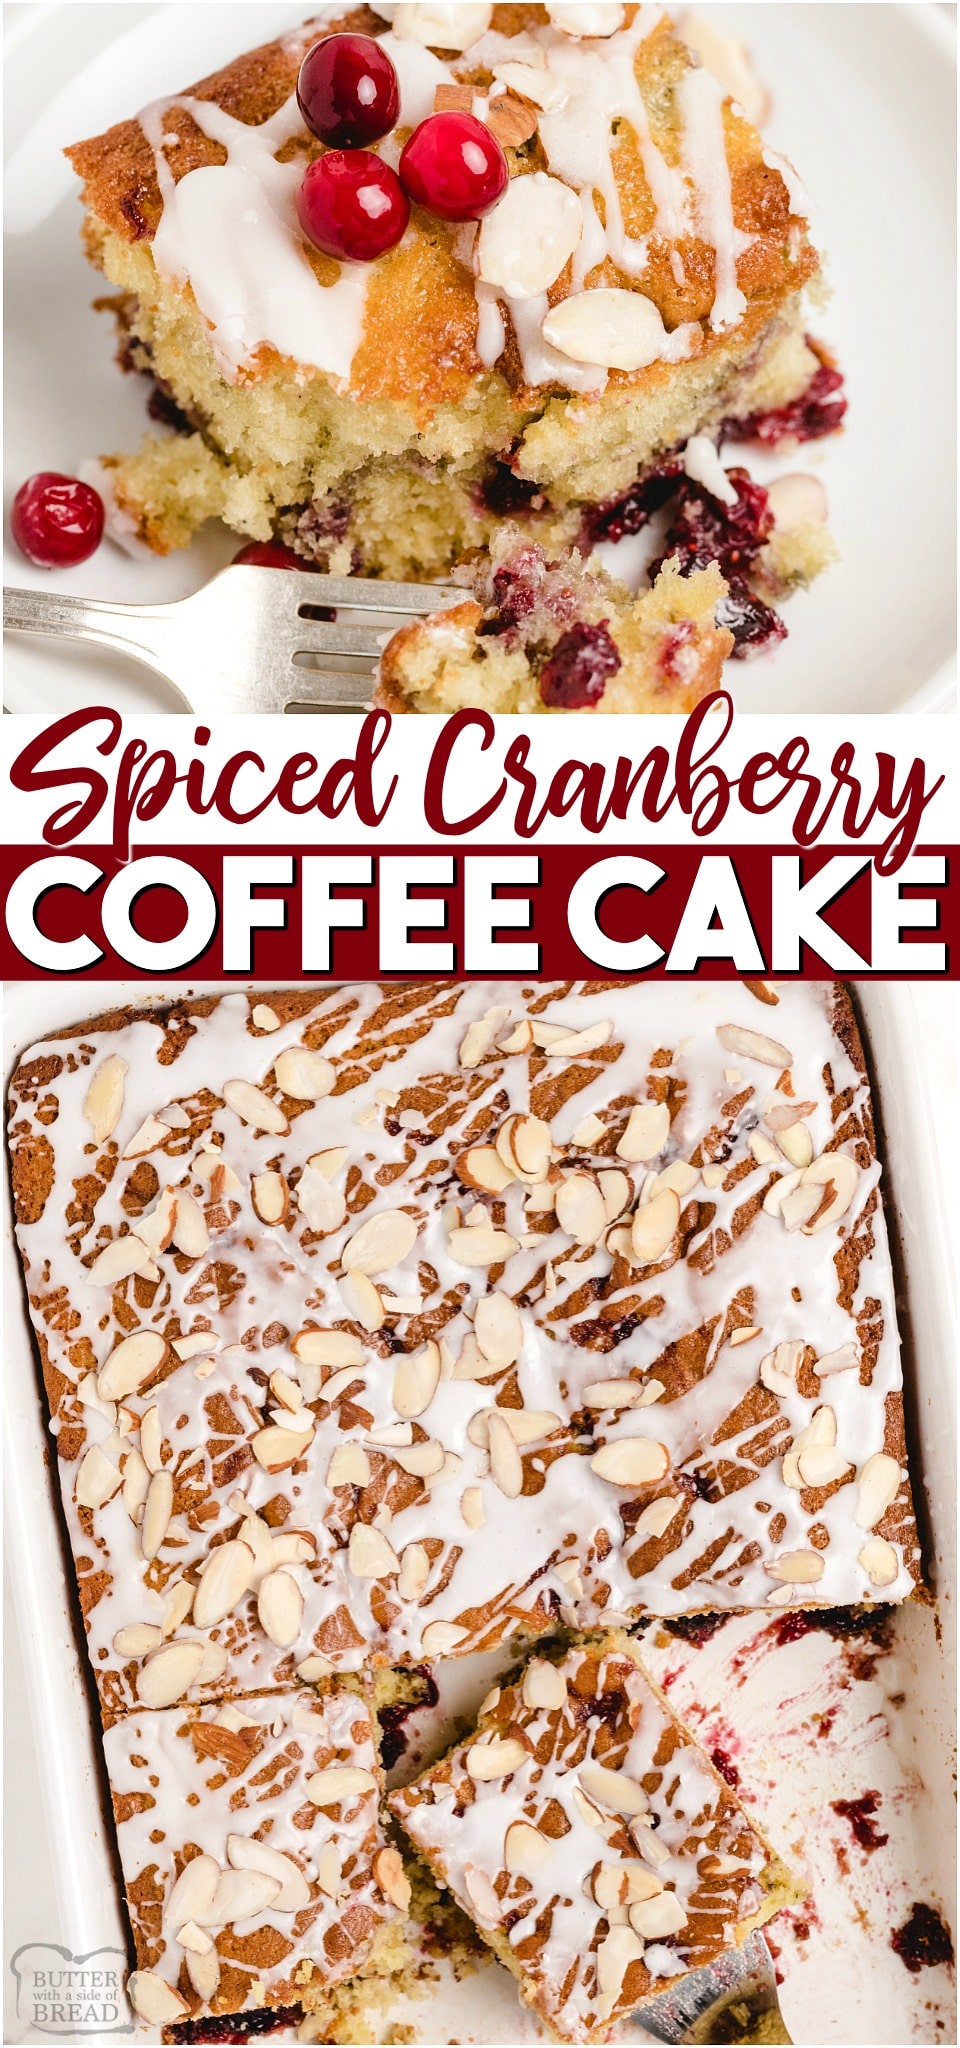 Cranberry Coffee Cake made with fresh cranberries, cinnamon, nutmeg & a simple breakfast cake batter. Perfect cranberry coffee cake recipe for holiday mornings! #cranberry #Christmas #cake #breakfast #coffeecake #easyrecipe from BUTTER WITH A SIDE OF BREAD